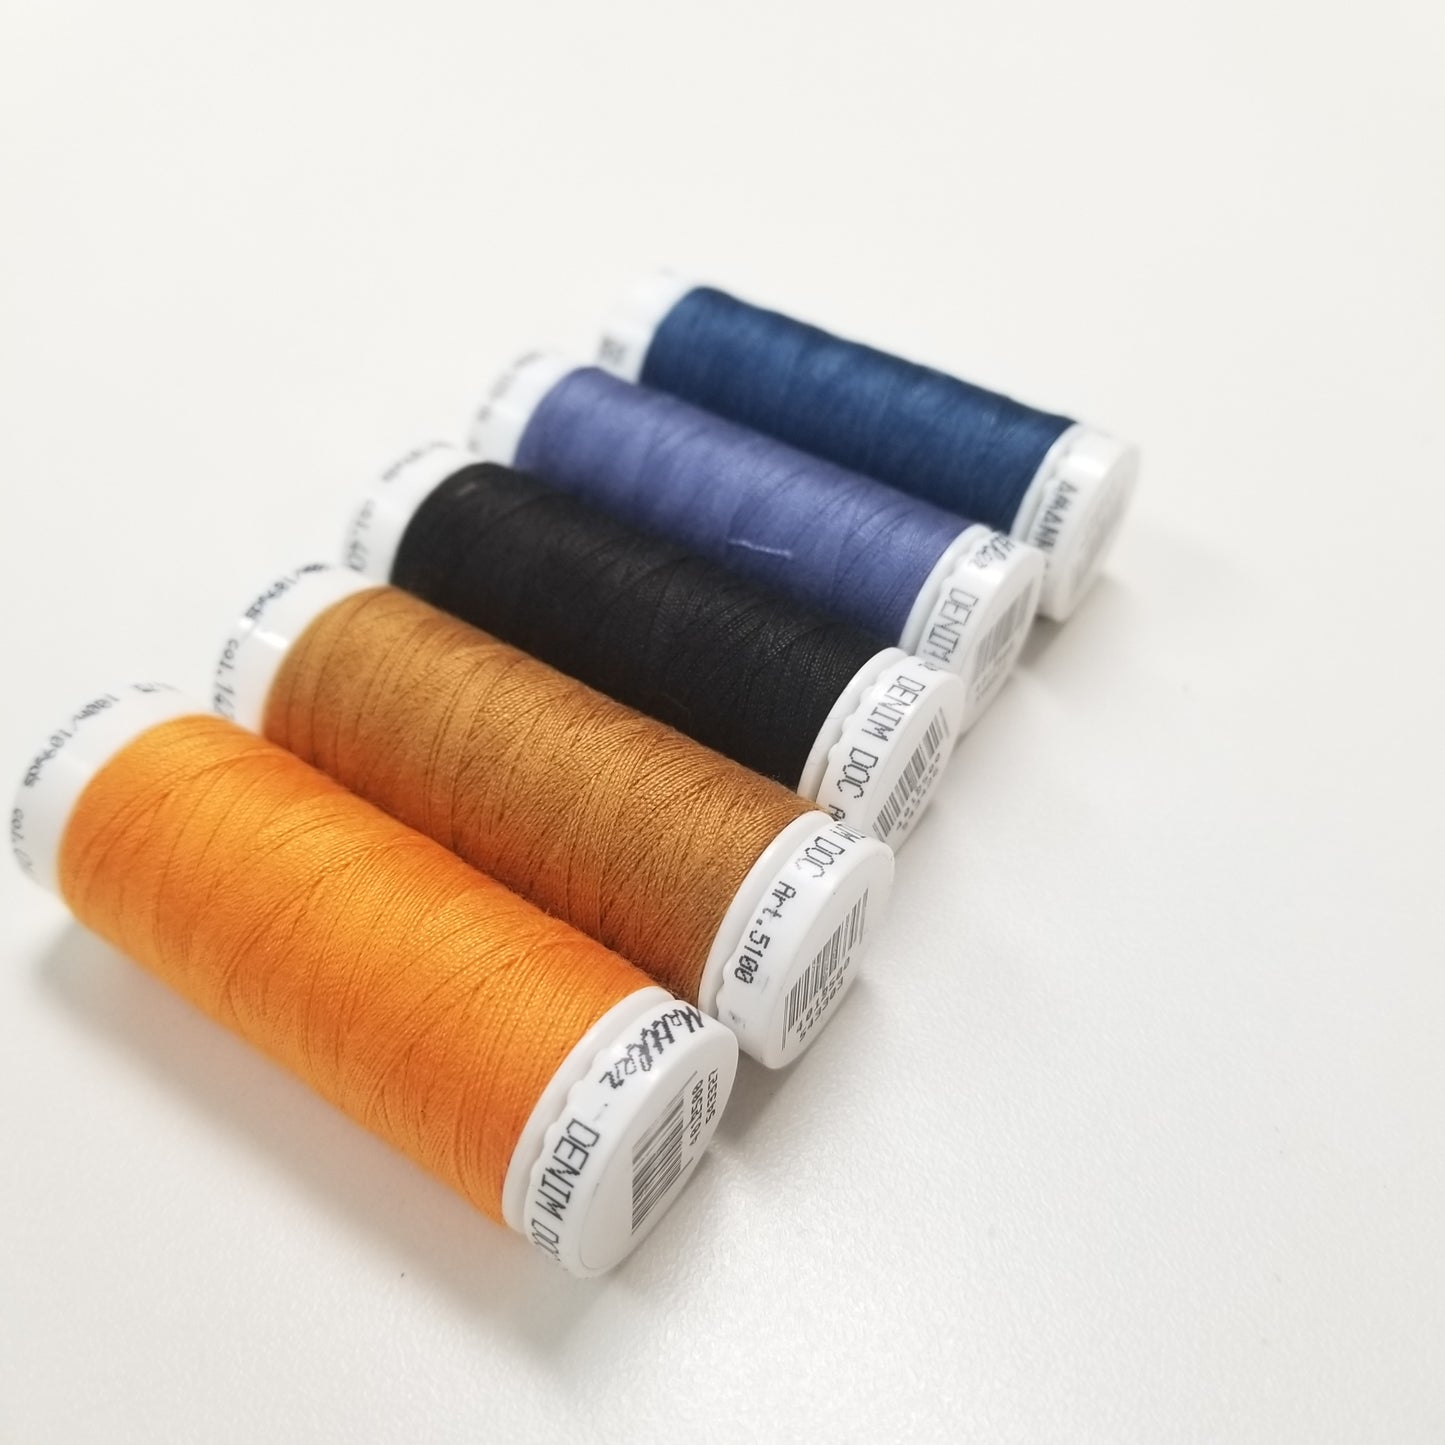 Notion: Mettler Denim Doc Thread #0122 Pumpkin Cotton Covered Polyester 40wt-109 yards- Sold by the Spool